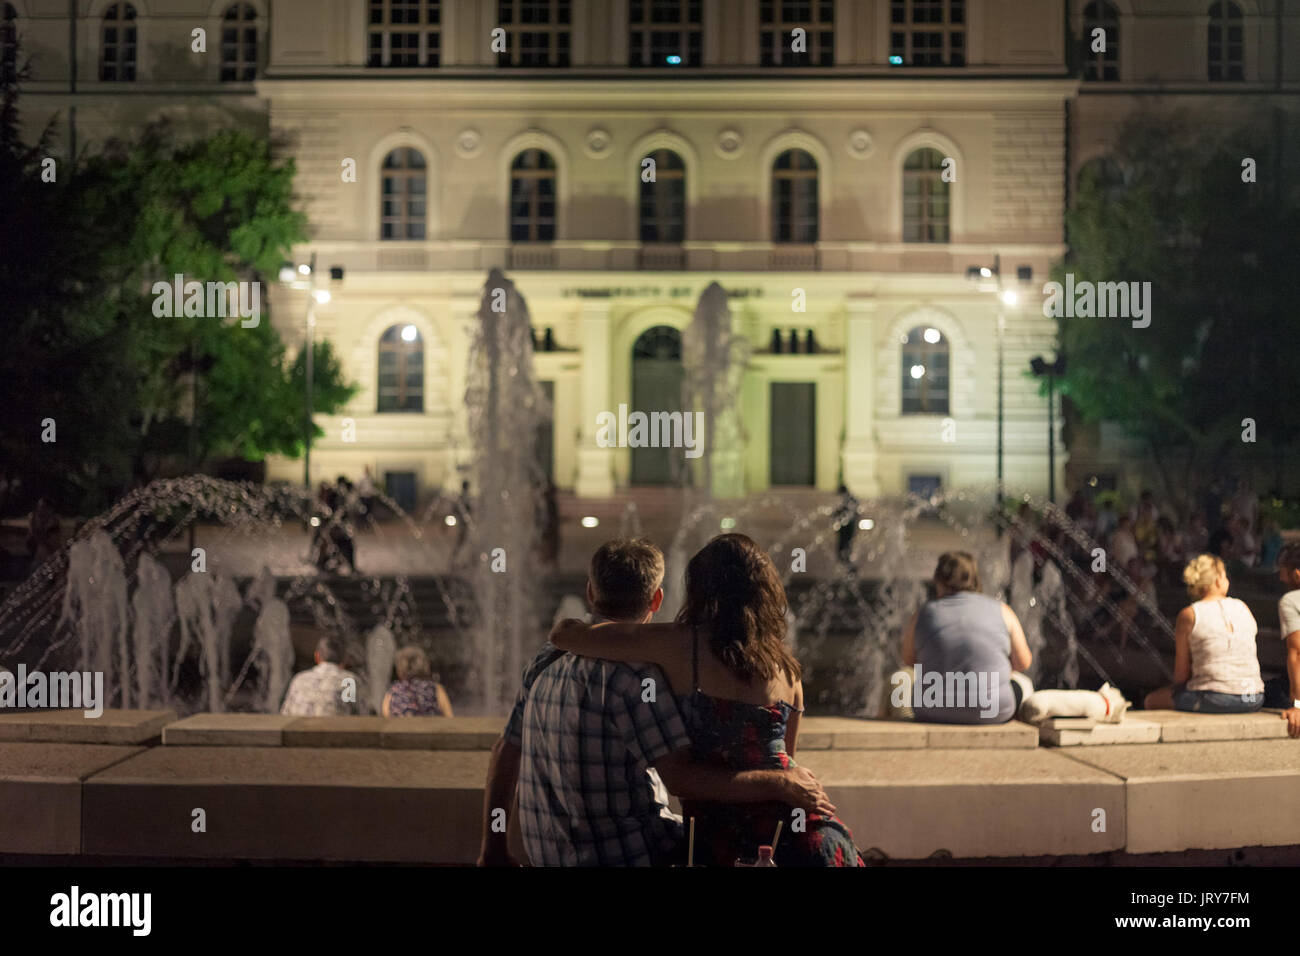 SZEGED, HUNGARY - JULY 22, 2017: Lovers in front of the Fountain on Dugonics Ter Square at night in summer. This square, and the university building o Stock Photo